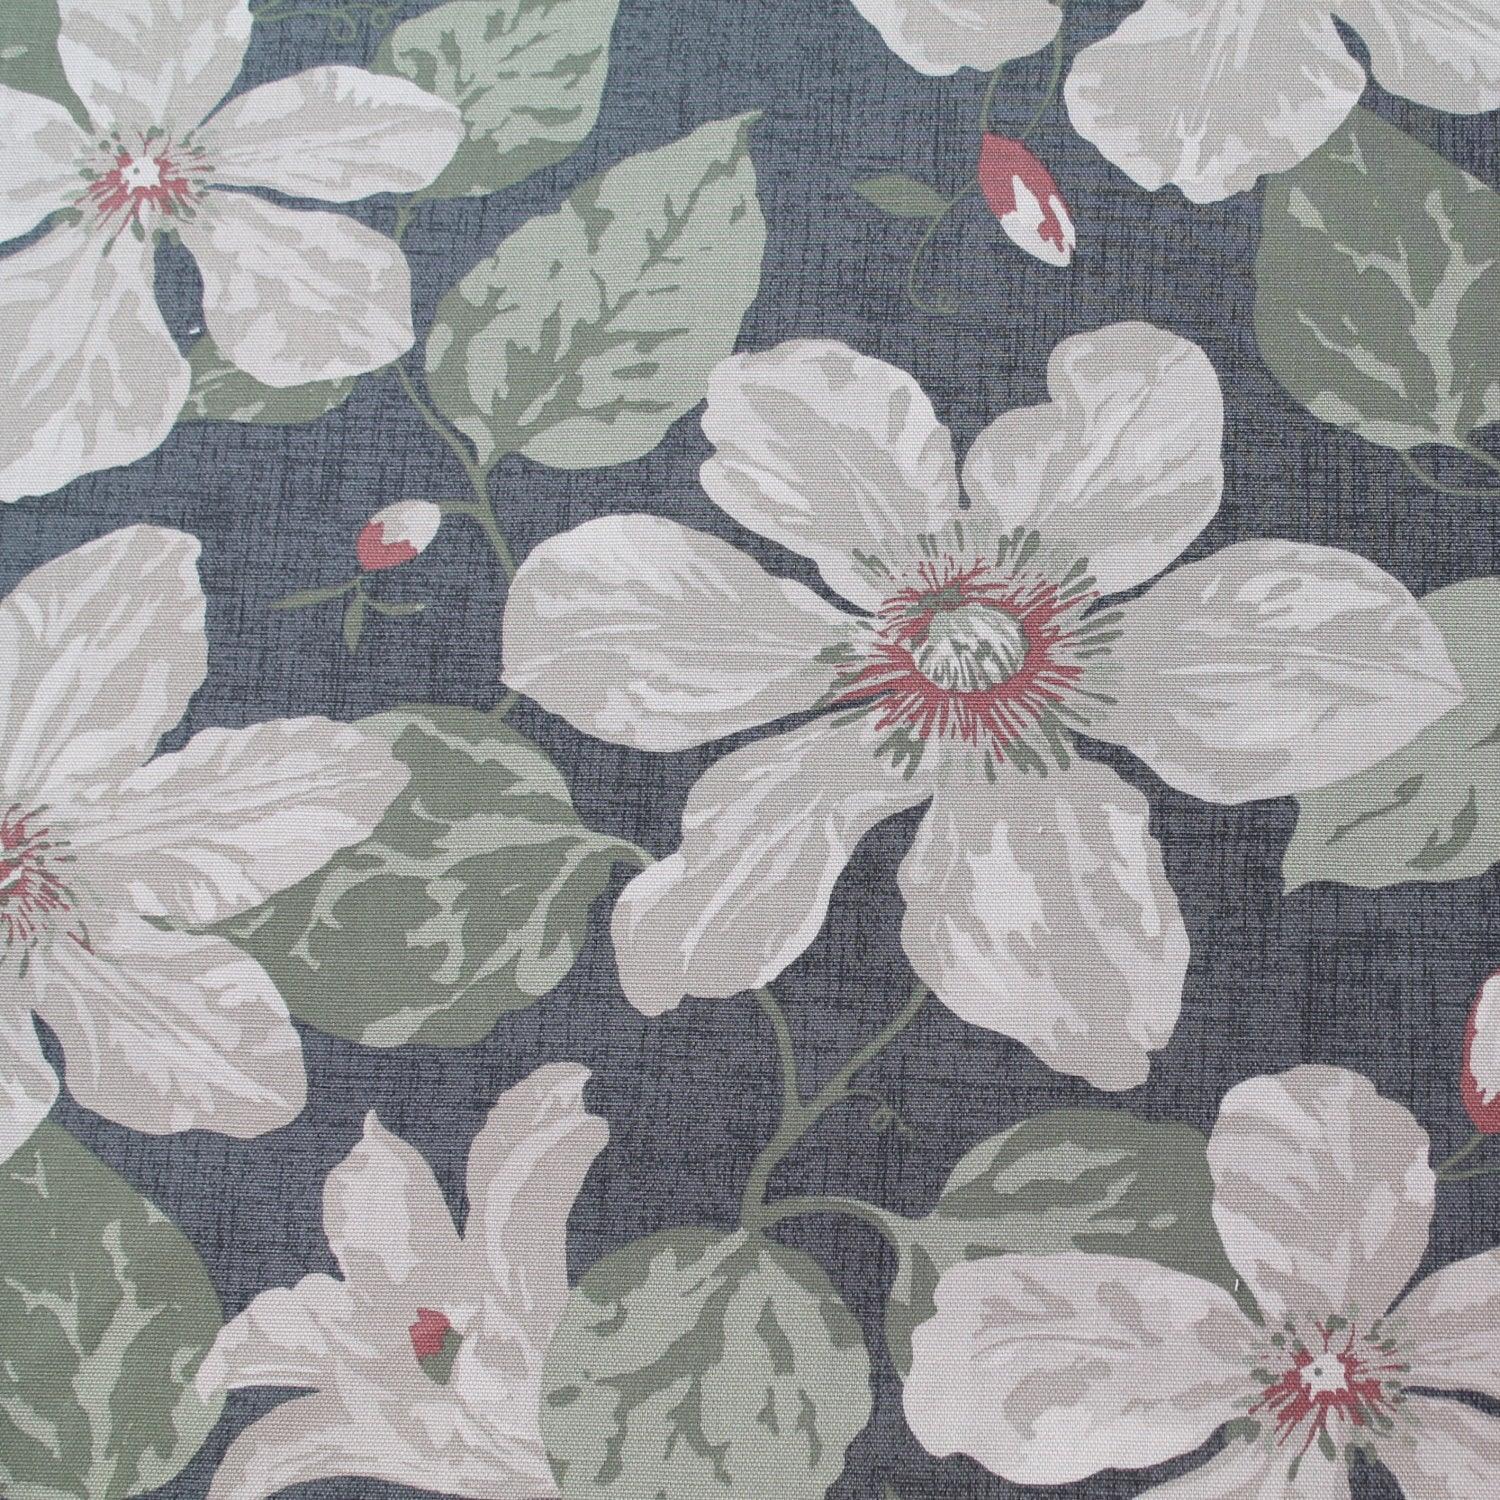 Floral Upholstery Drapery and Couch Fabric Large Print Cotton natural Fabric